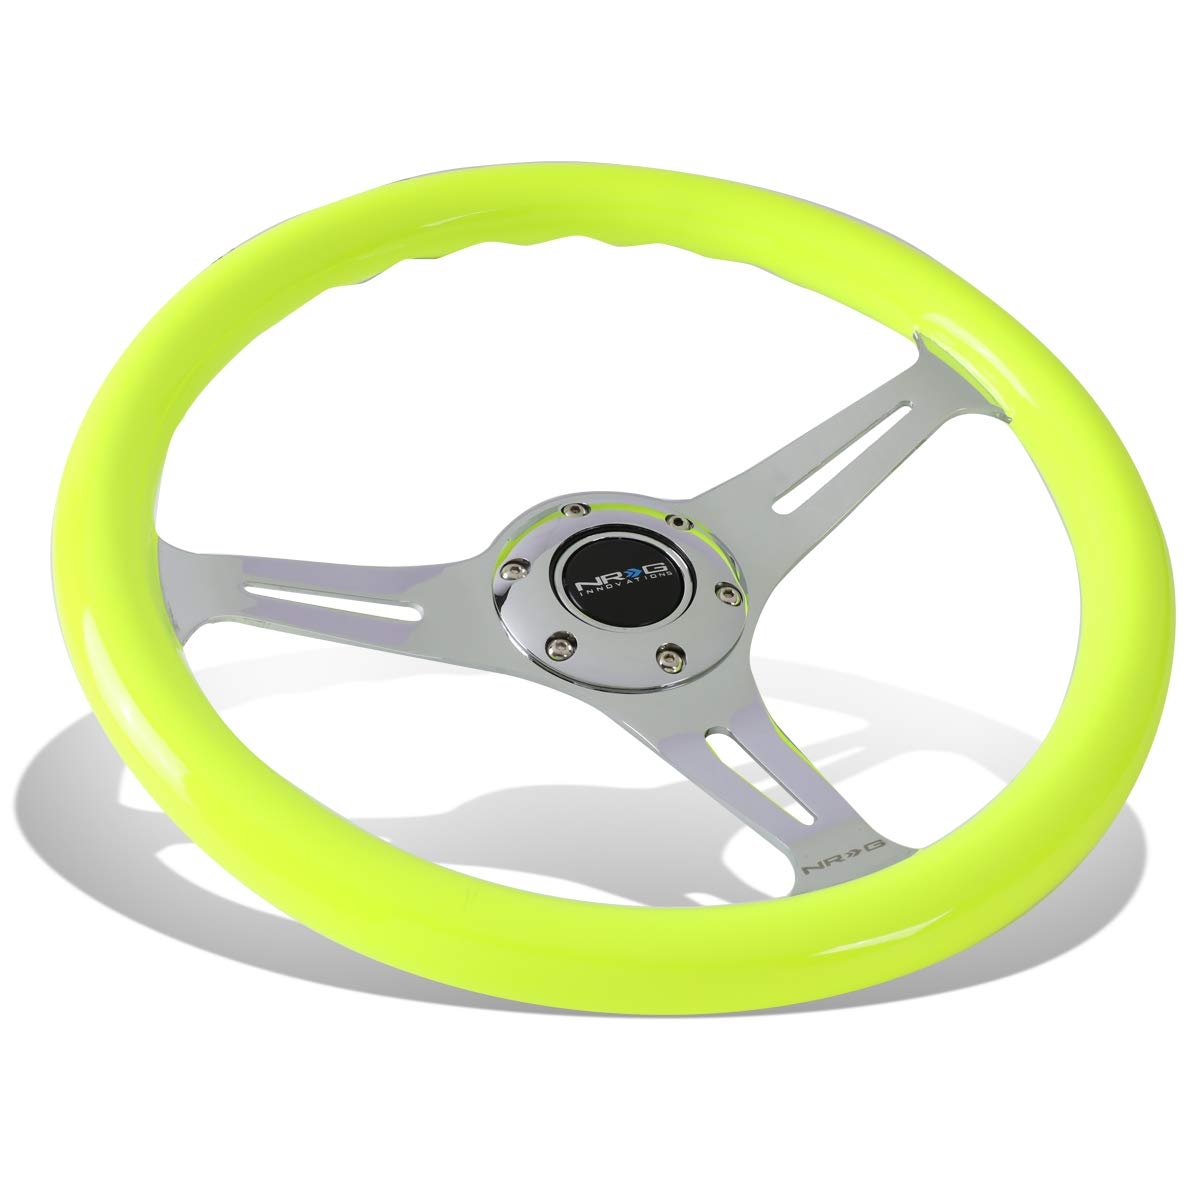 NRG Classic Wood Grain Steering Wheel (350mm) Solid Pink Painted Grip w/ Neochrome 3-Spoke Center